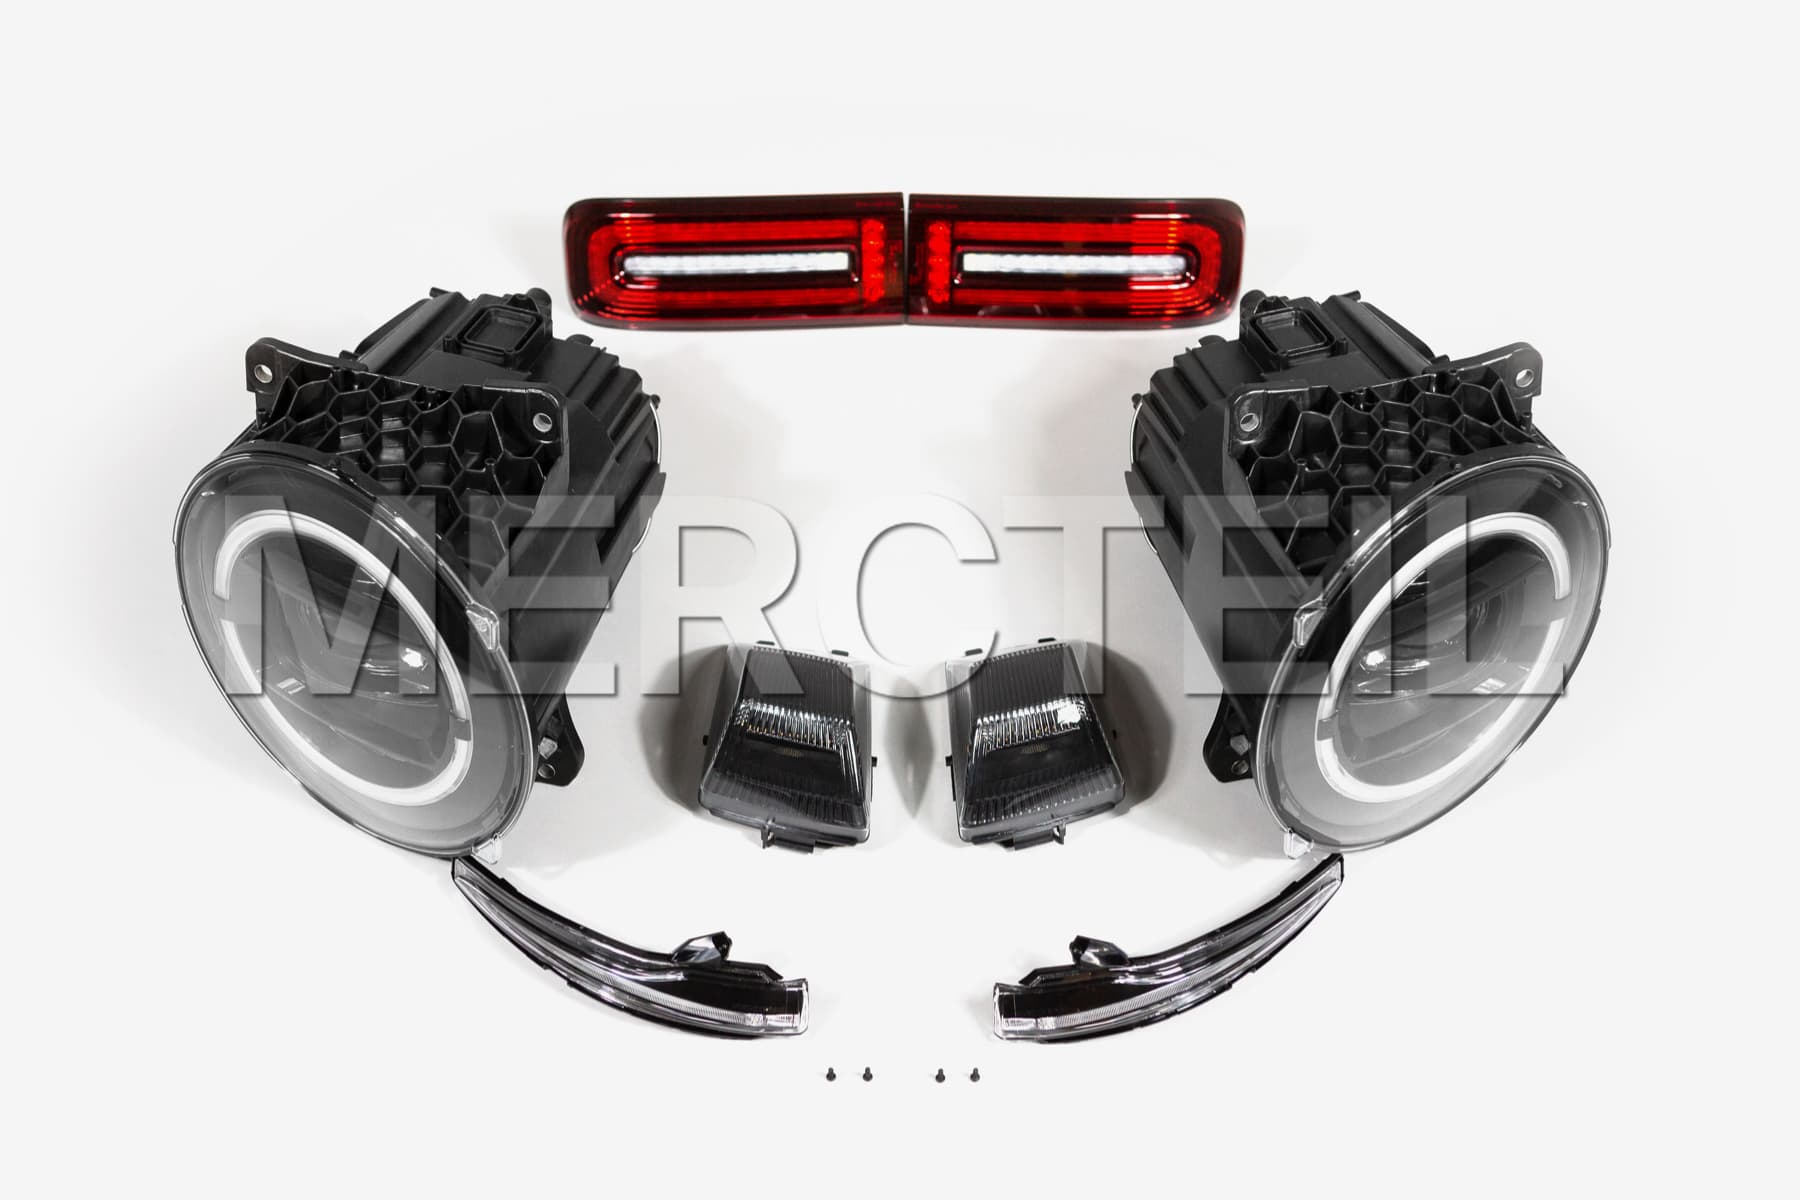 G Wagon Night Package Design Lights System Genuine Mercedes-Benz  W463A (part number: 	
A0999067201)